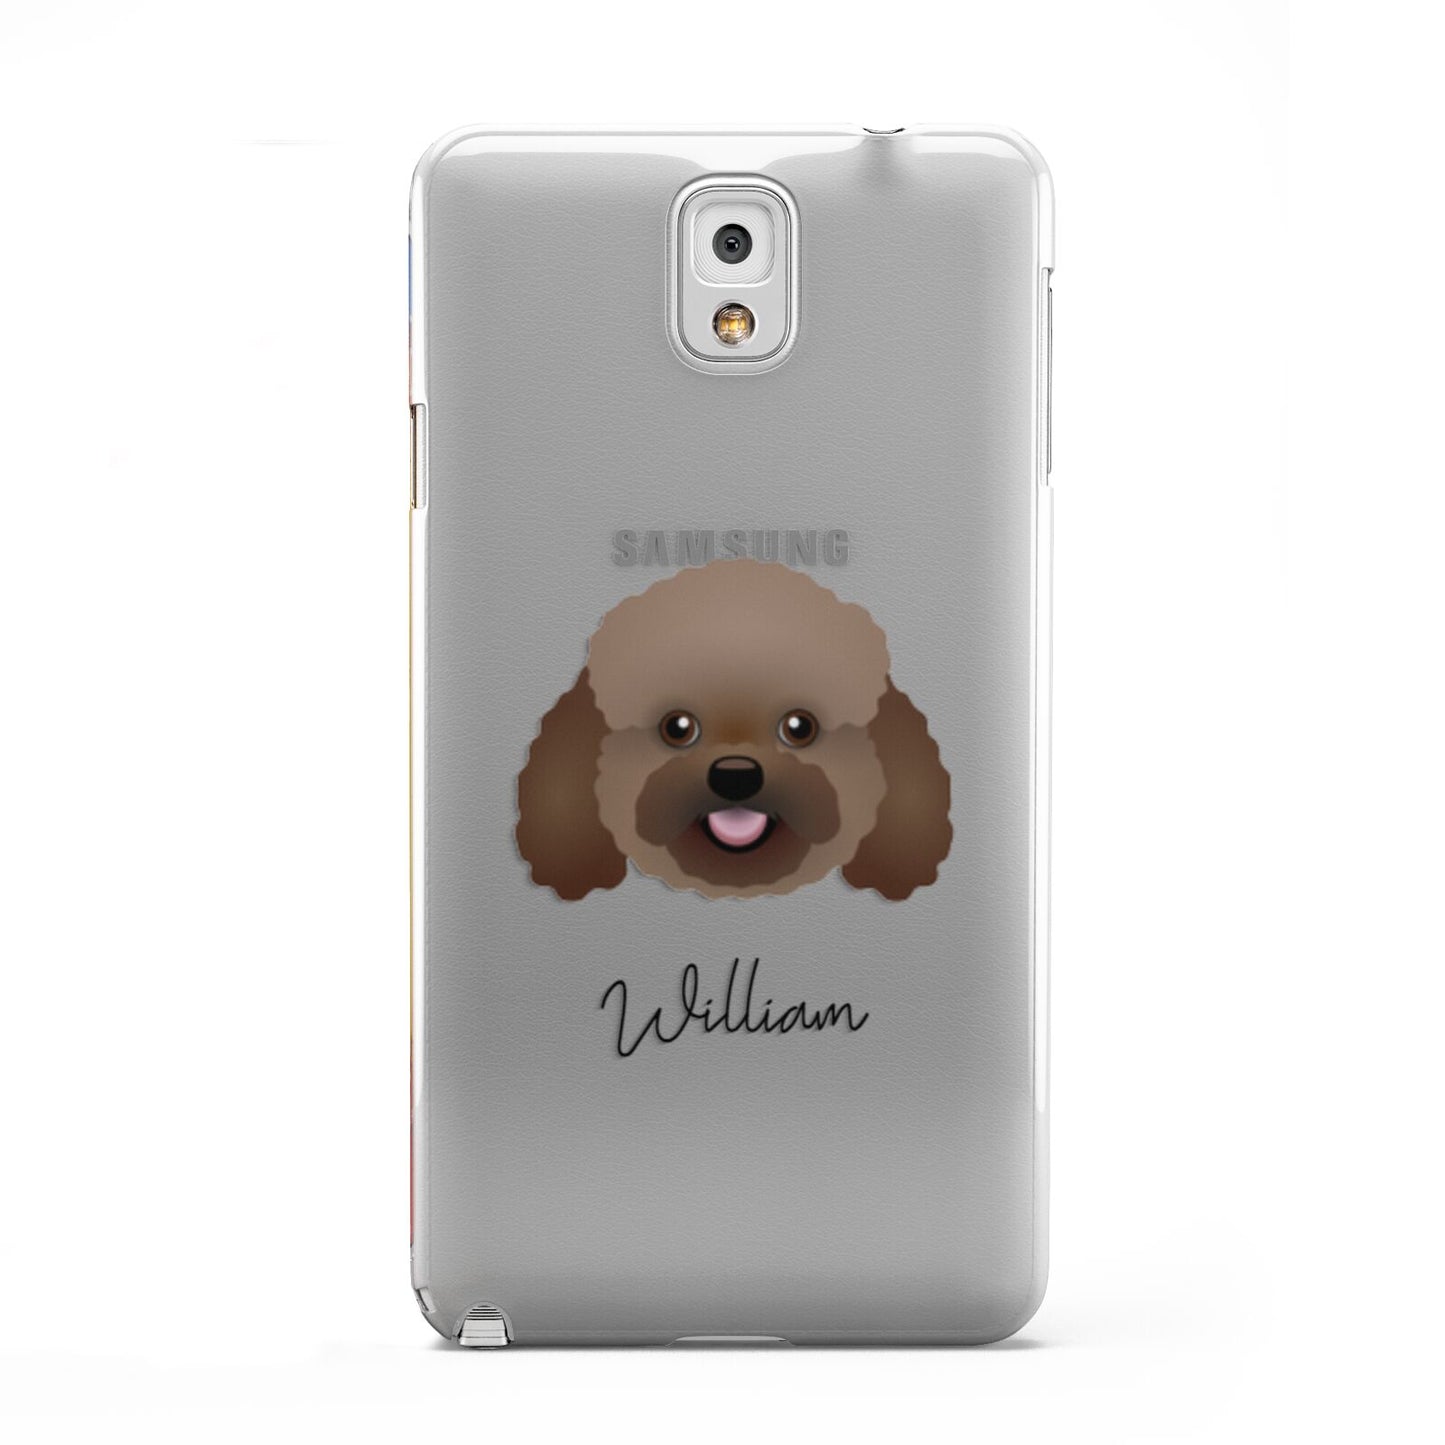 Bich poo Personalised Samsung Galaxy Note 3 Case